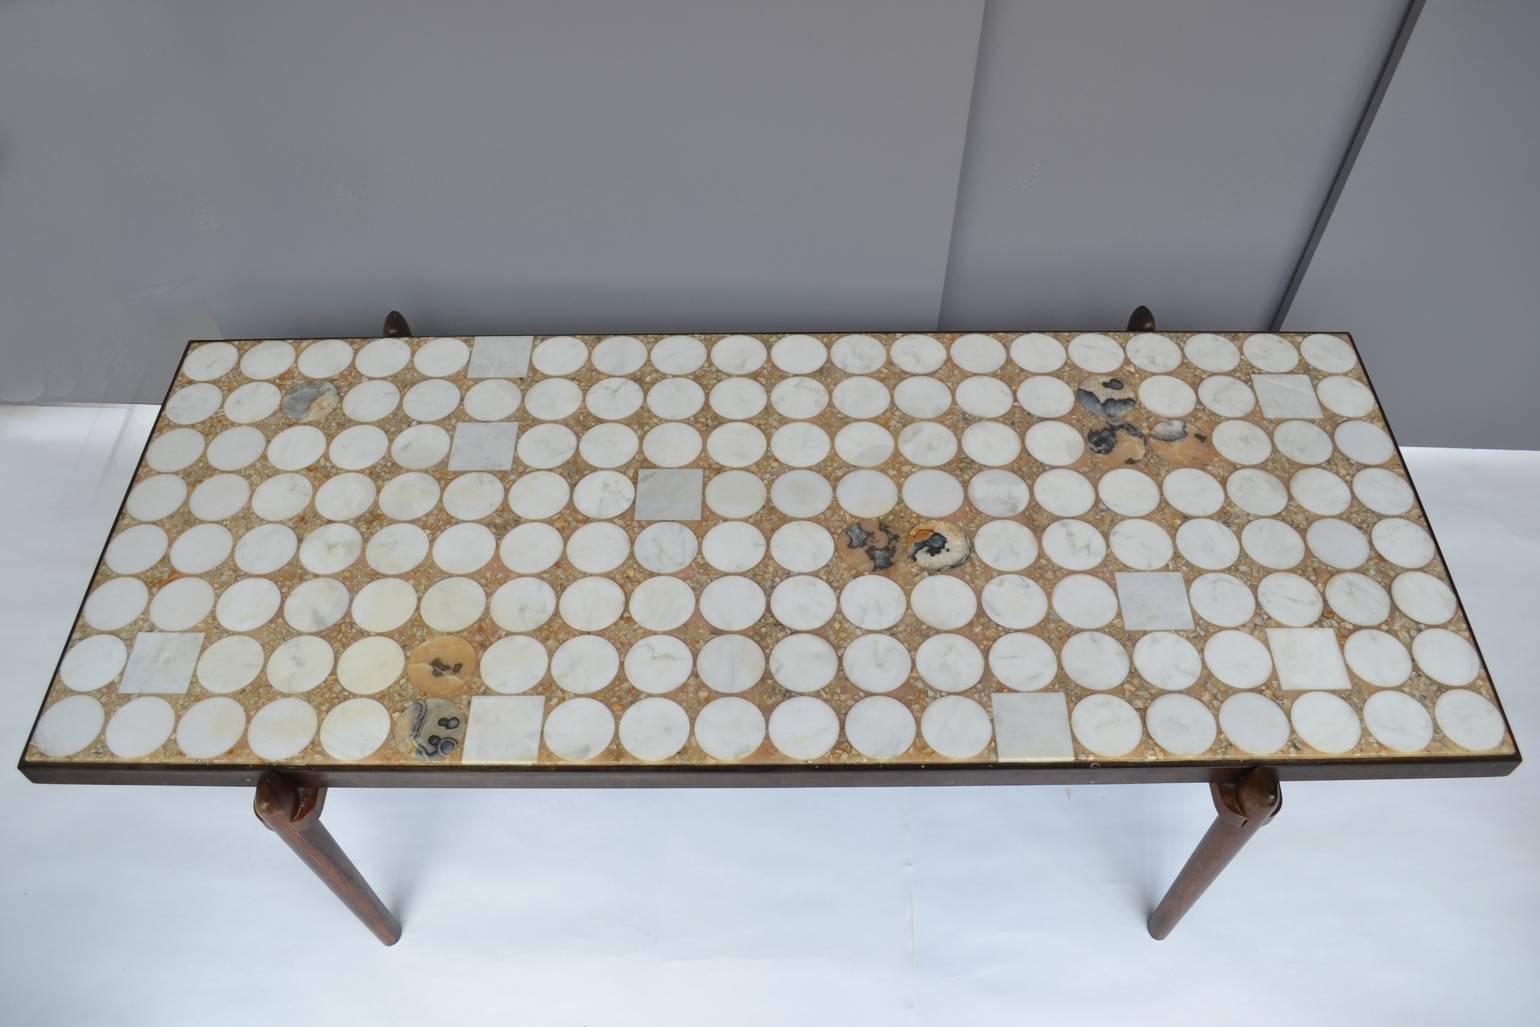 Very rare and sculptural coffee table designed in the 1960s by German Heinz Lilienthal with Carrara marble and onyx circles and squares inlay on a hard wood frame and sculpted legs.